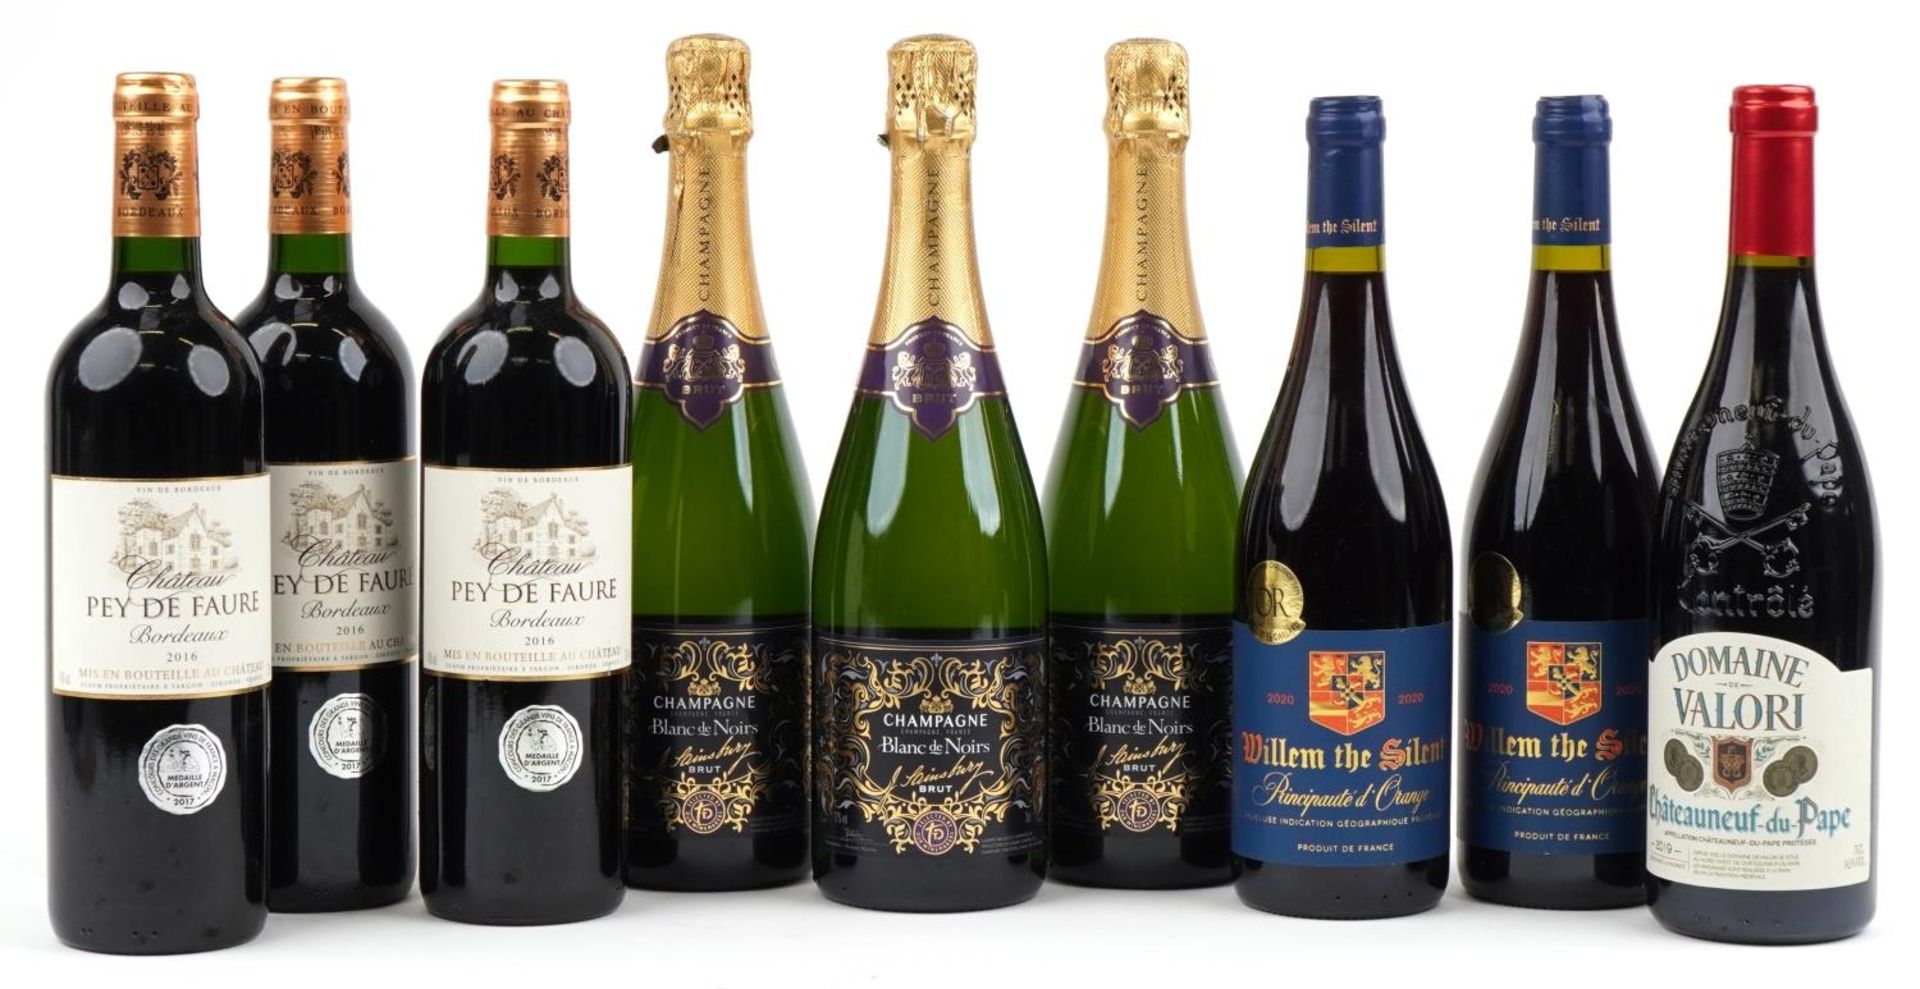 Six bottles of red wine and three bottles of Blanc de Noirs Champagne, the red wine comprising three